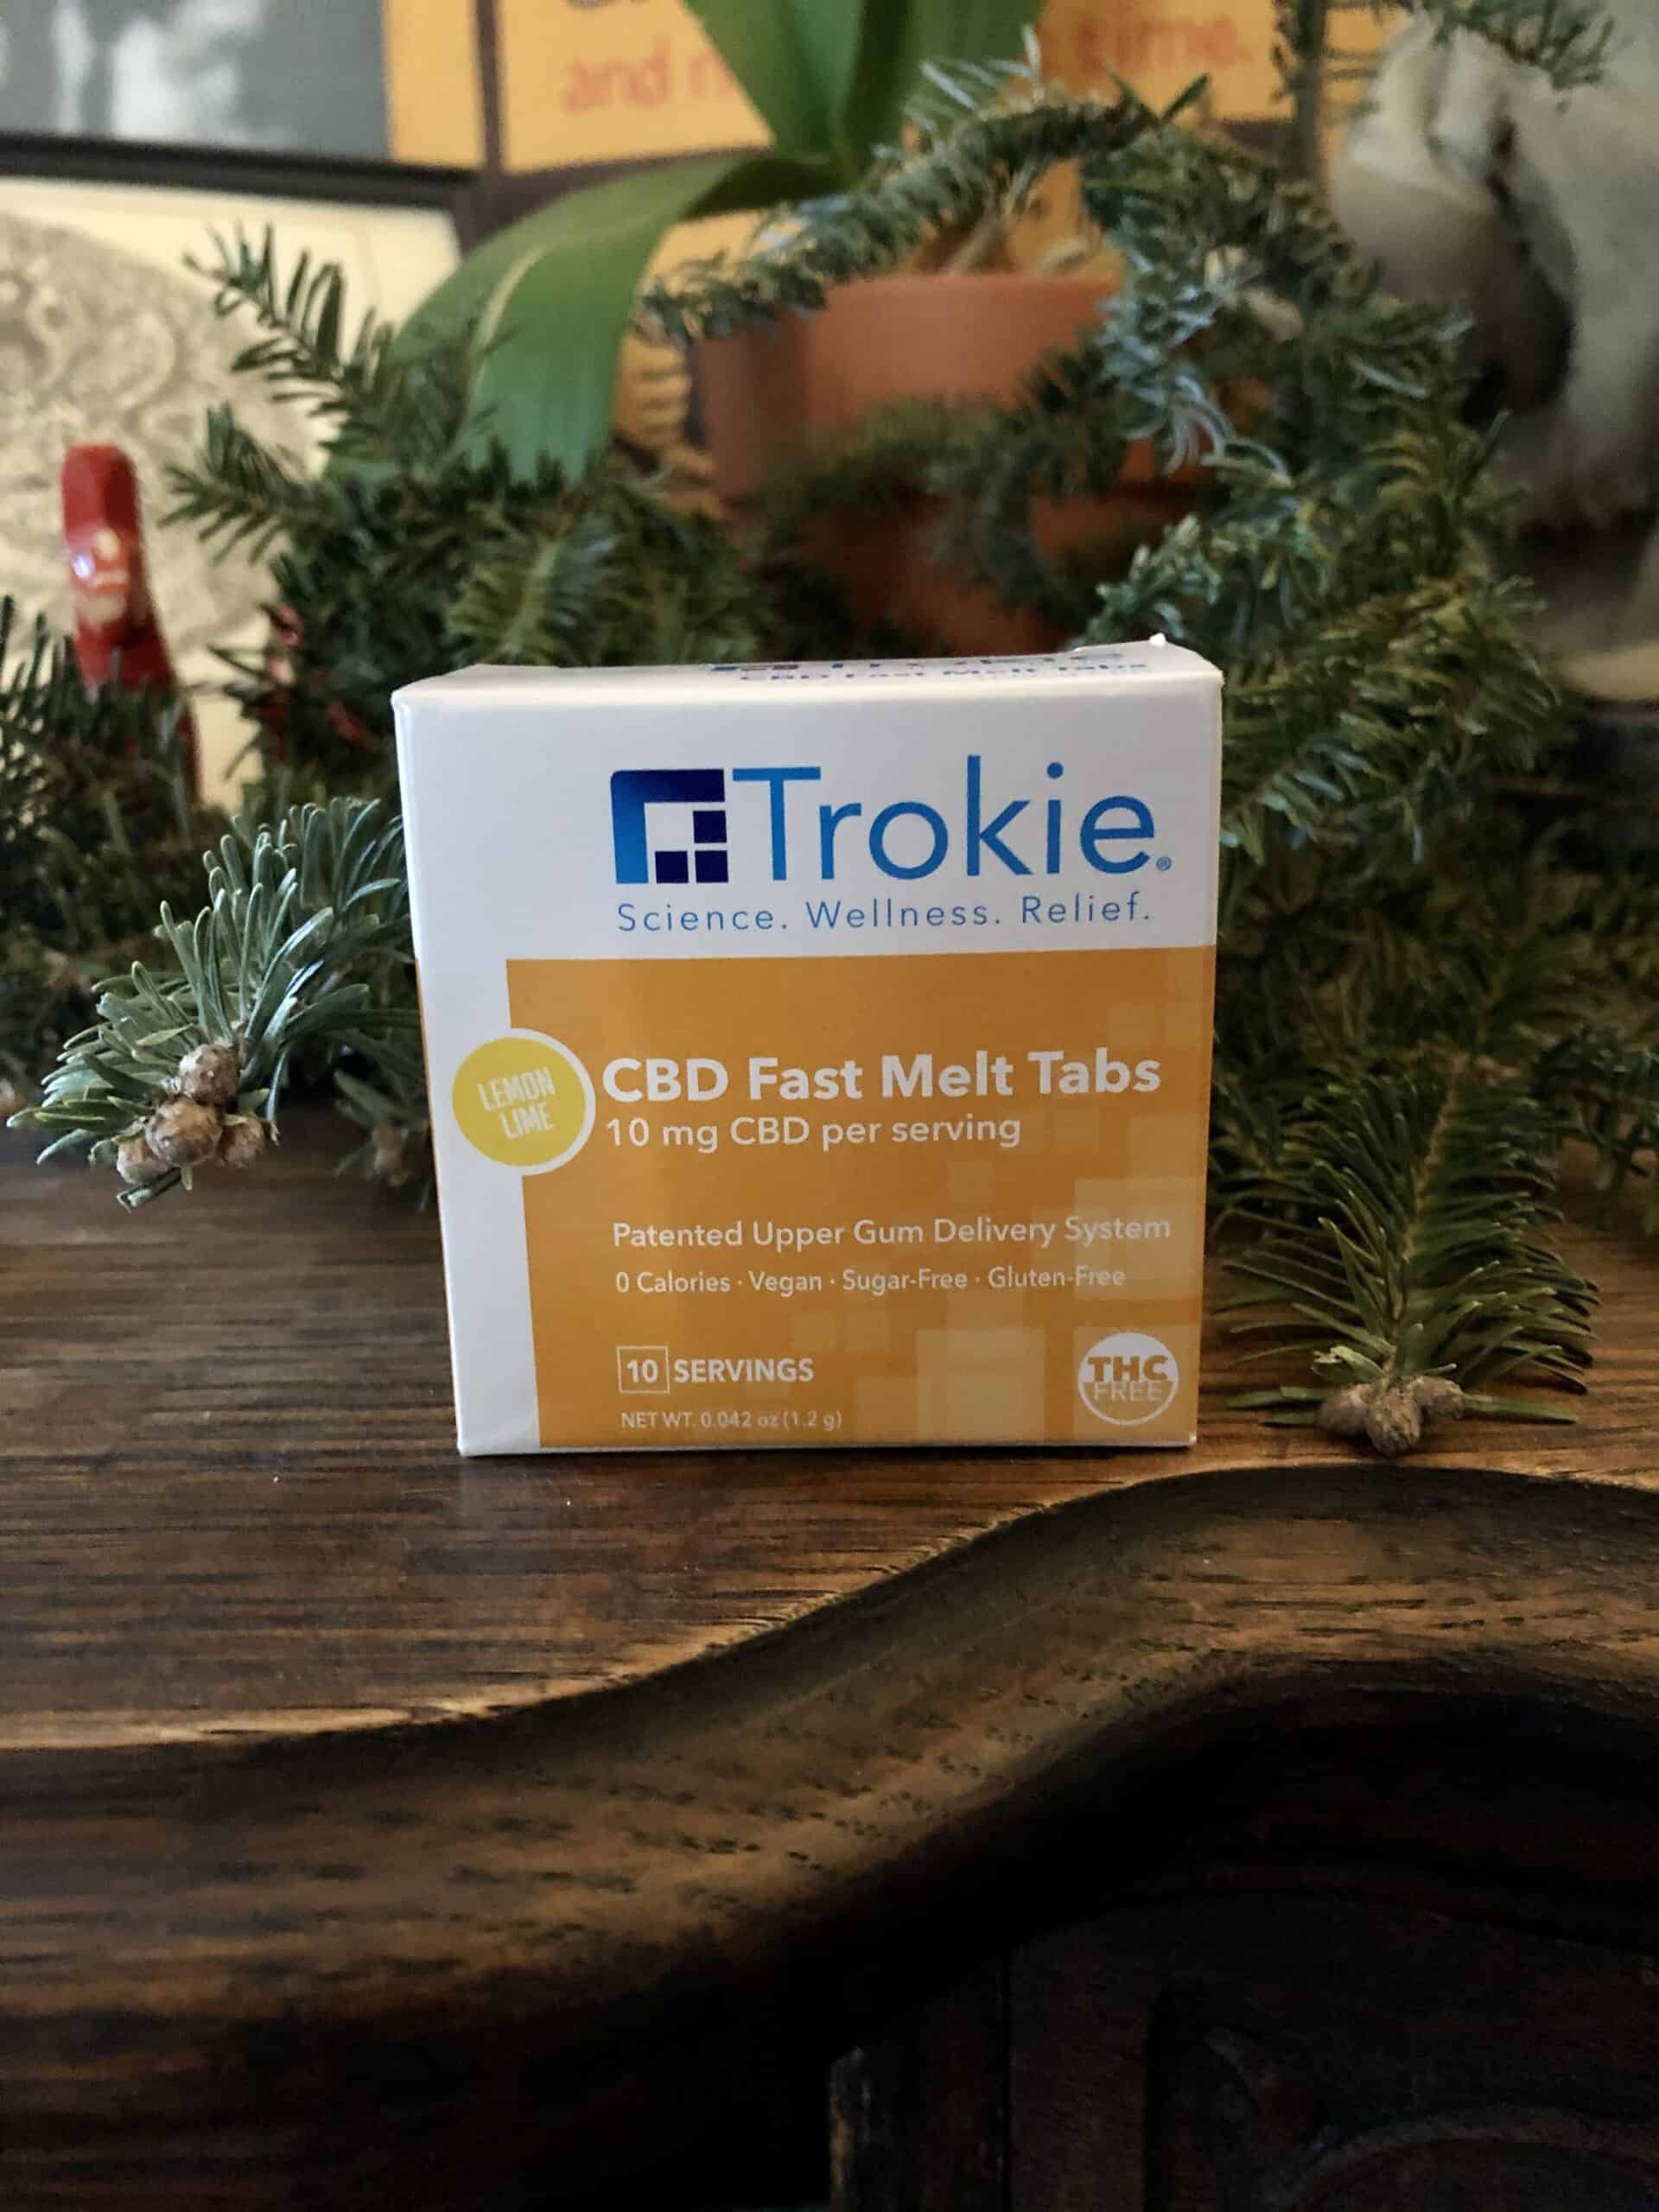 Trokie Fast Melt Tabs Save On Cannabis Review 